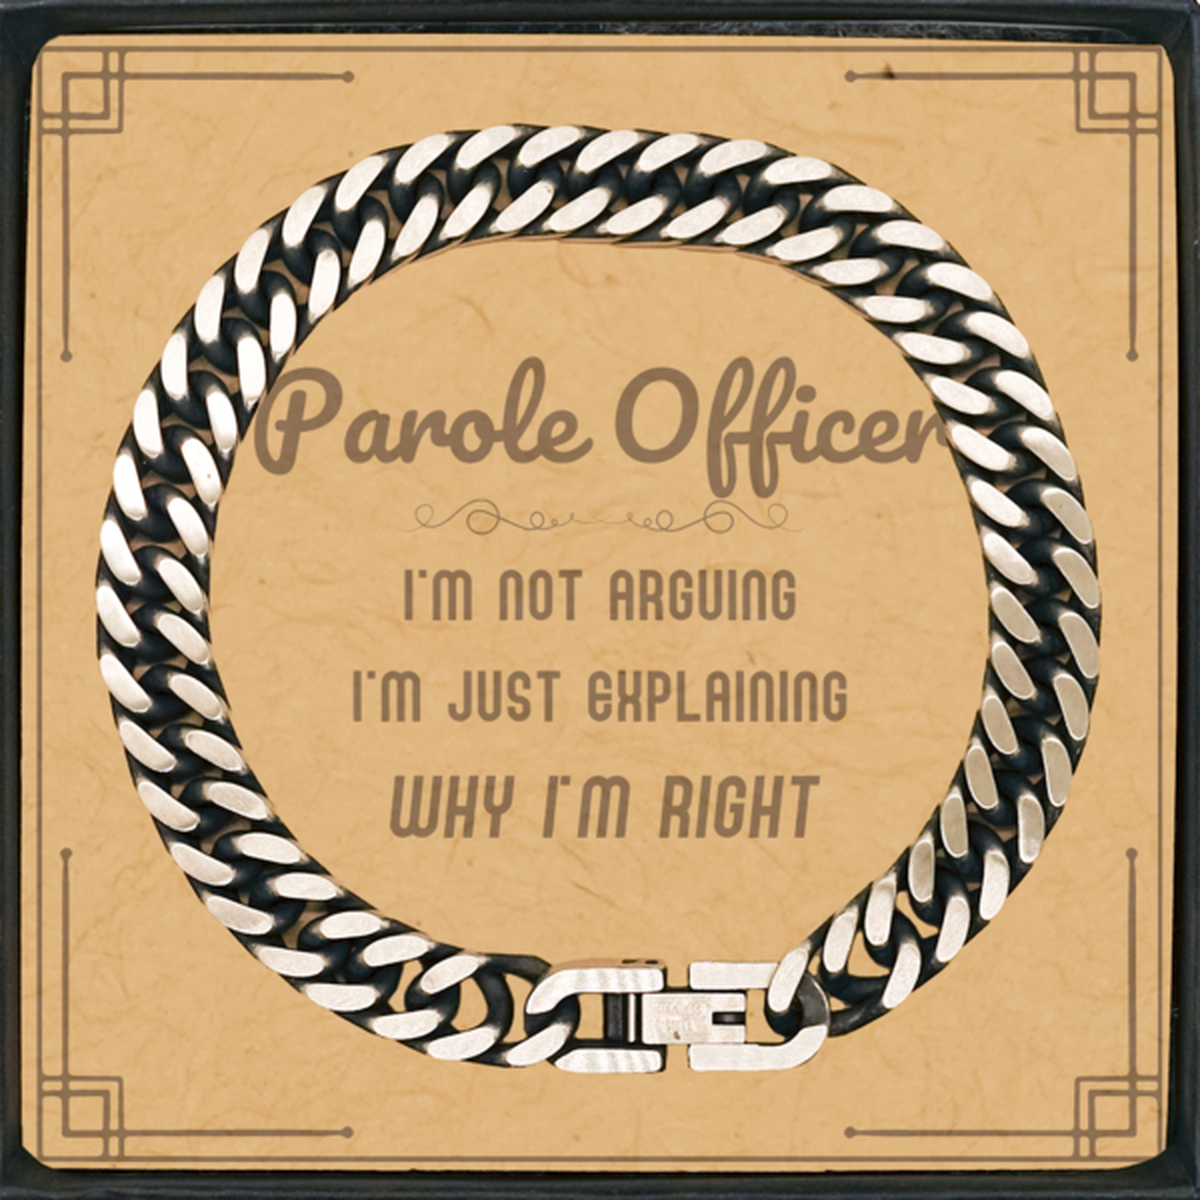 Parole Officer I'm not Arguing. I'm Just Explaining Why I'm RIGHT Cuban Link Chain Bracelet, Funny Saying Quote Parole Officer Gifts For Parole Officer Message Card Graduation Birthday Christmas Gifts for Men Women Coworker